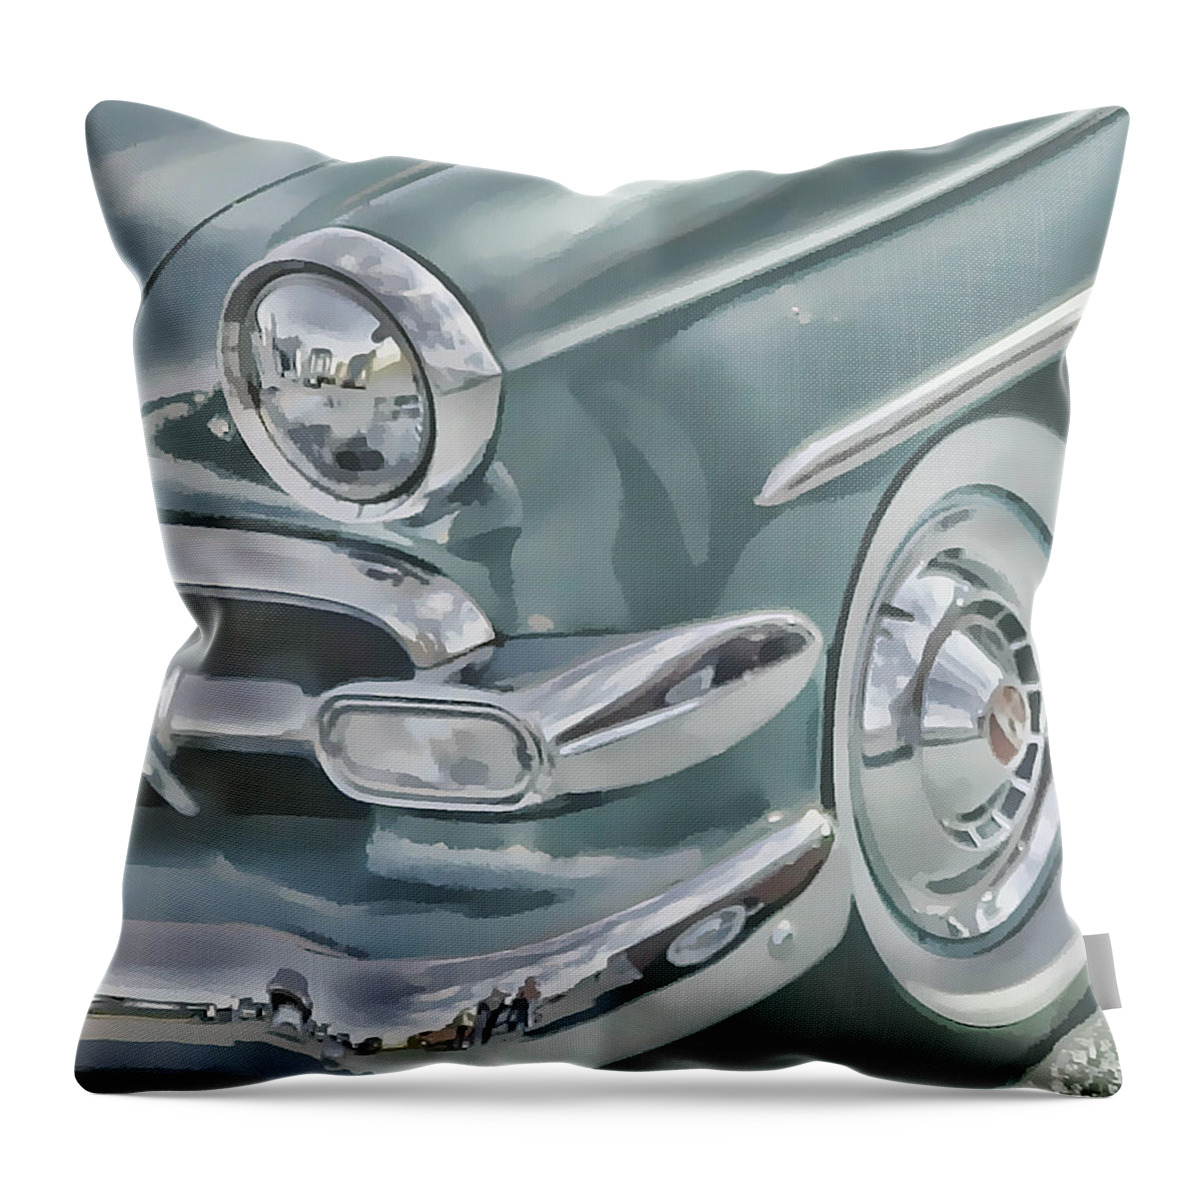 Victor Montgomery Throw Pillow featuring the photograph Bel Air headlight by Vic Montgomery